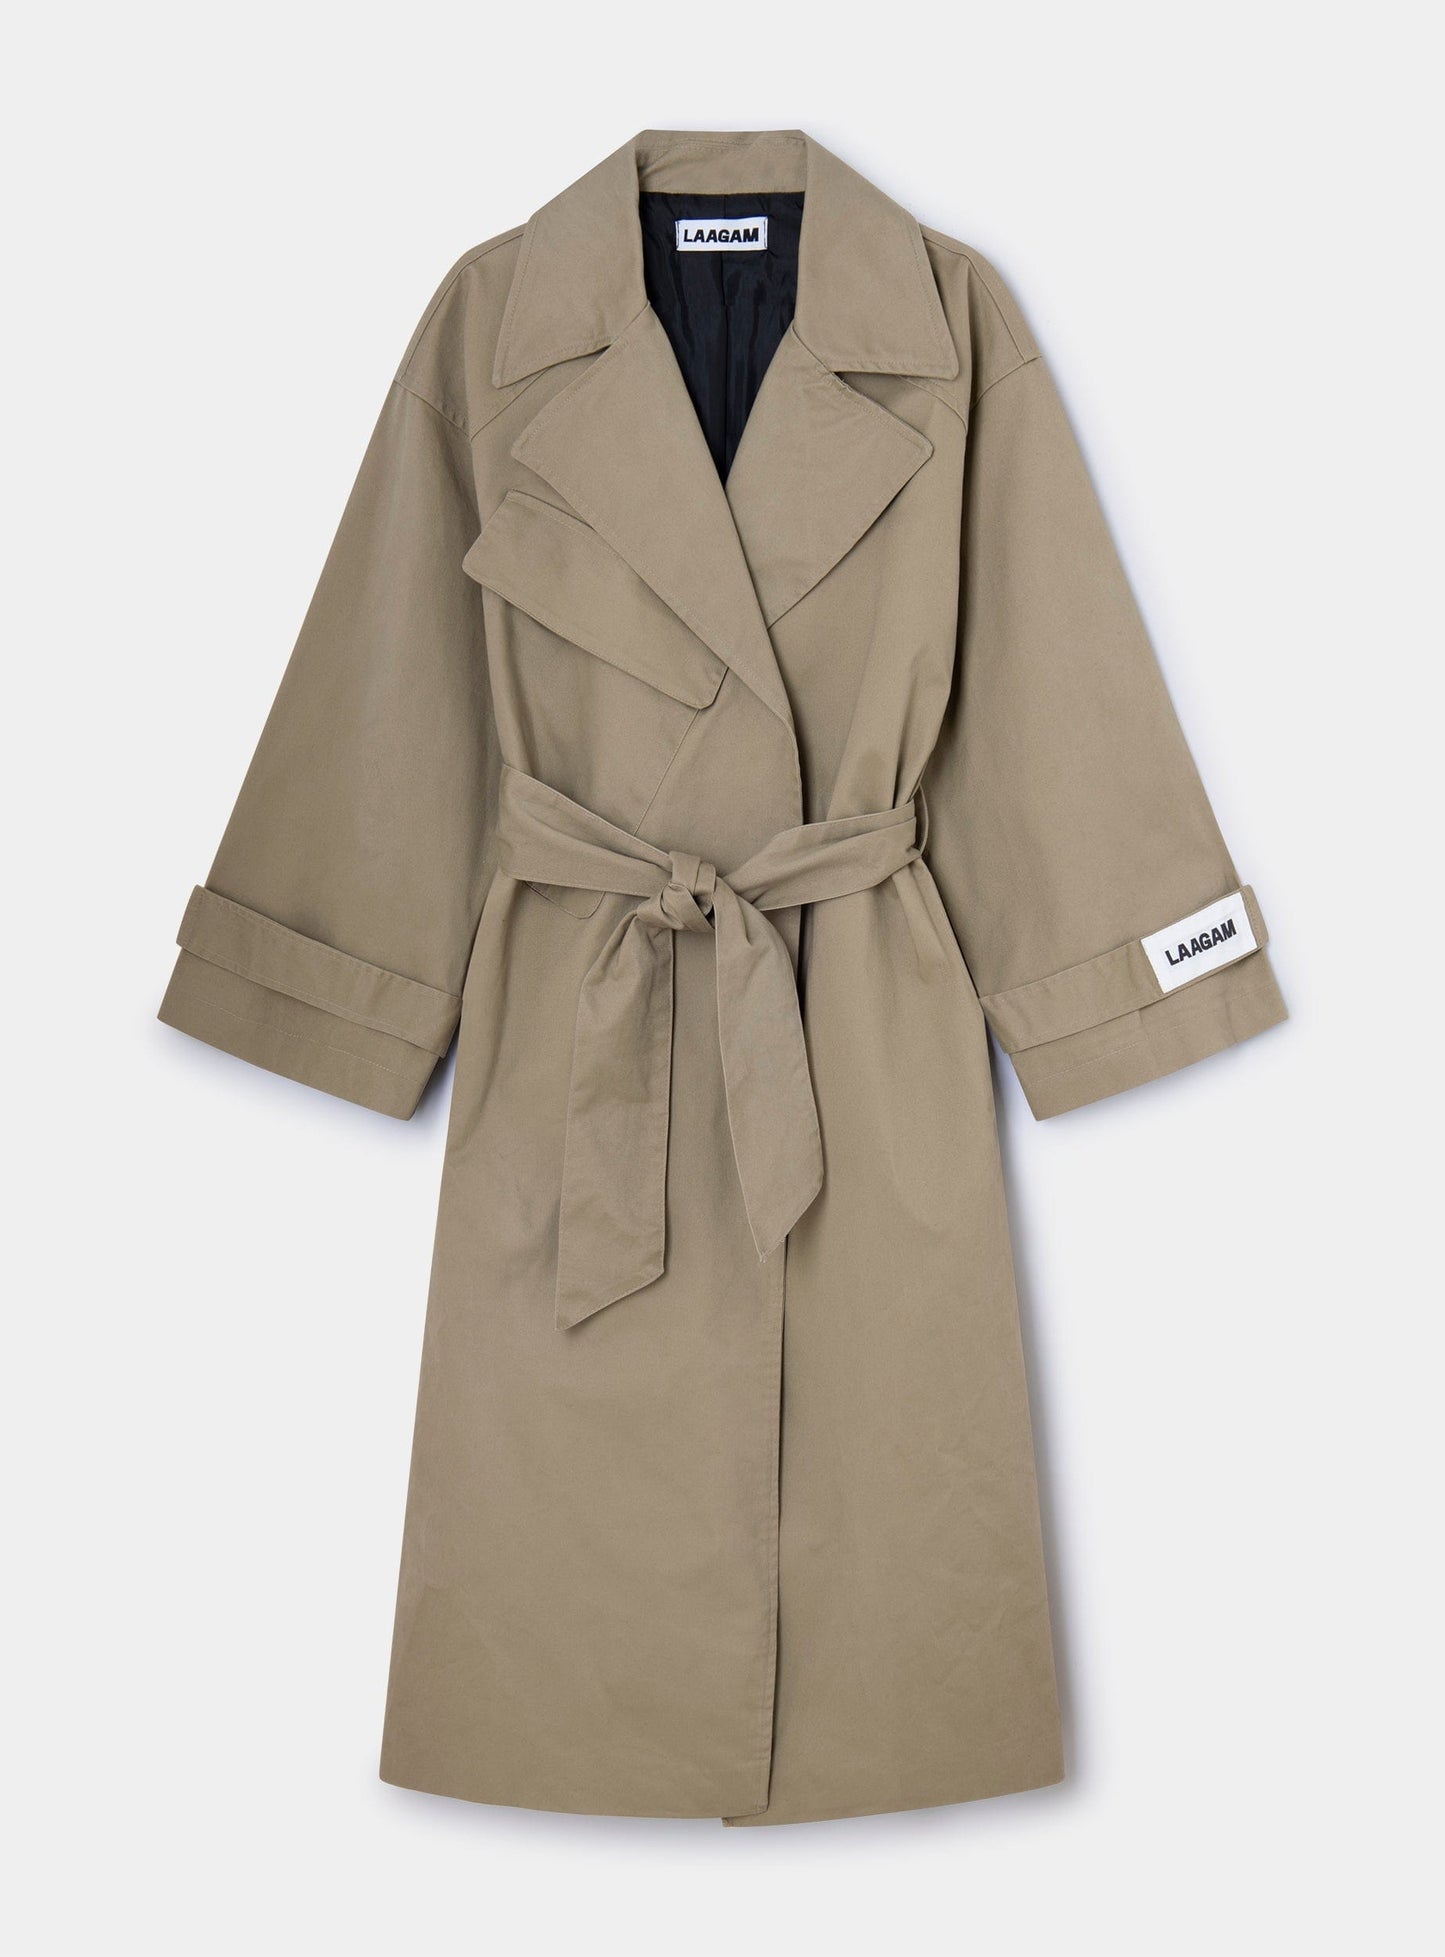 LONDRES BEIGE TRENCH